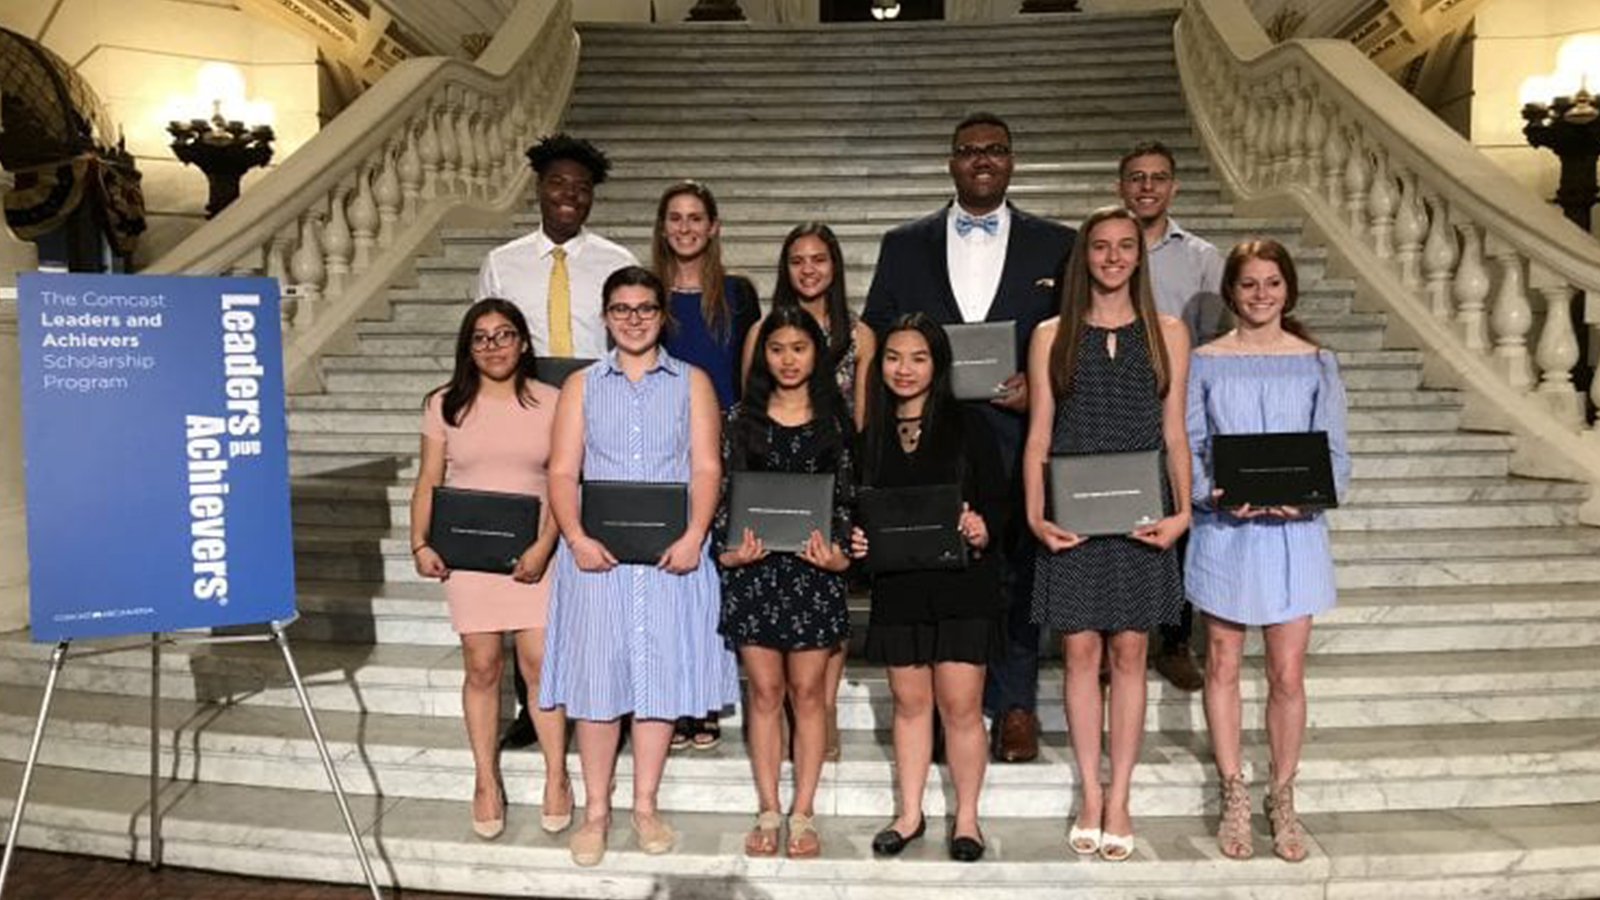 Students who won Comcast scholarships standing on steps in Pennsylvania Capitol